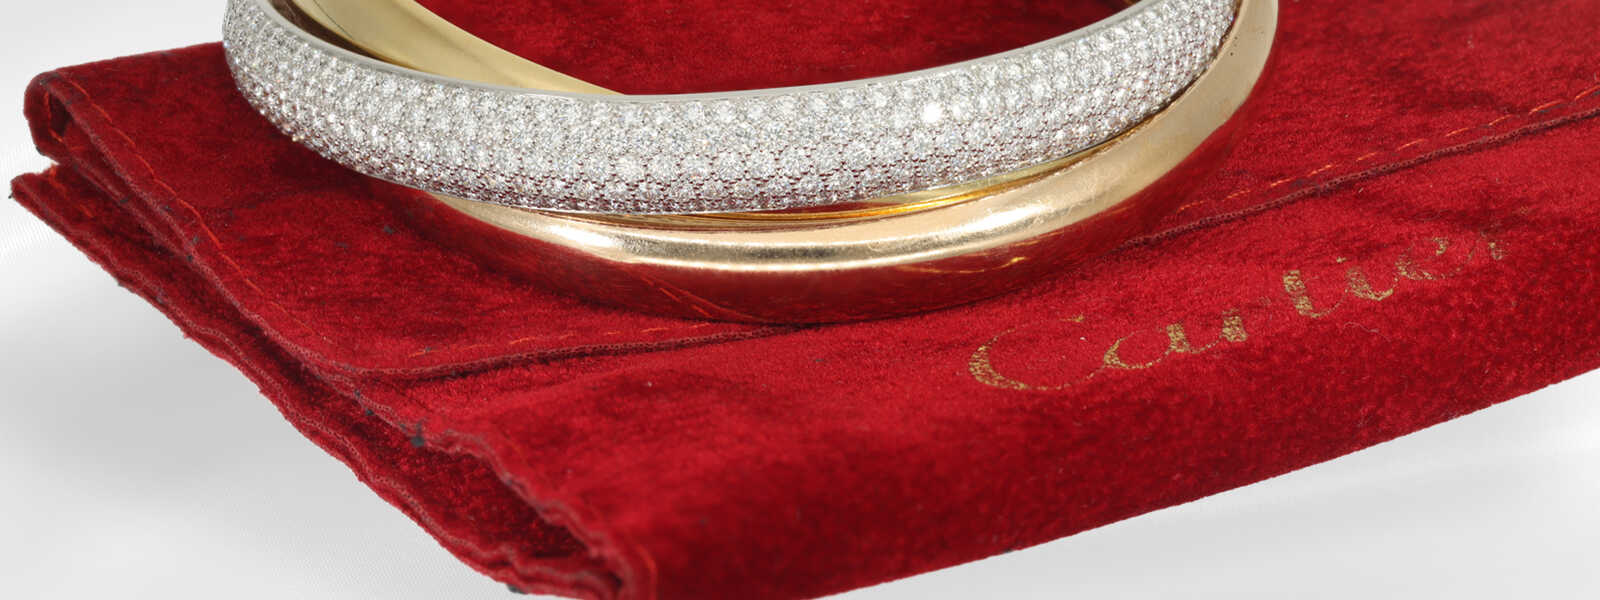 Bangle: luxurious and large version of the Cartier…